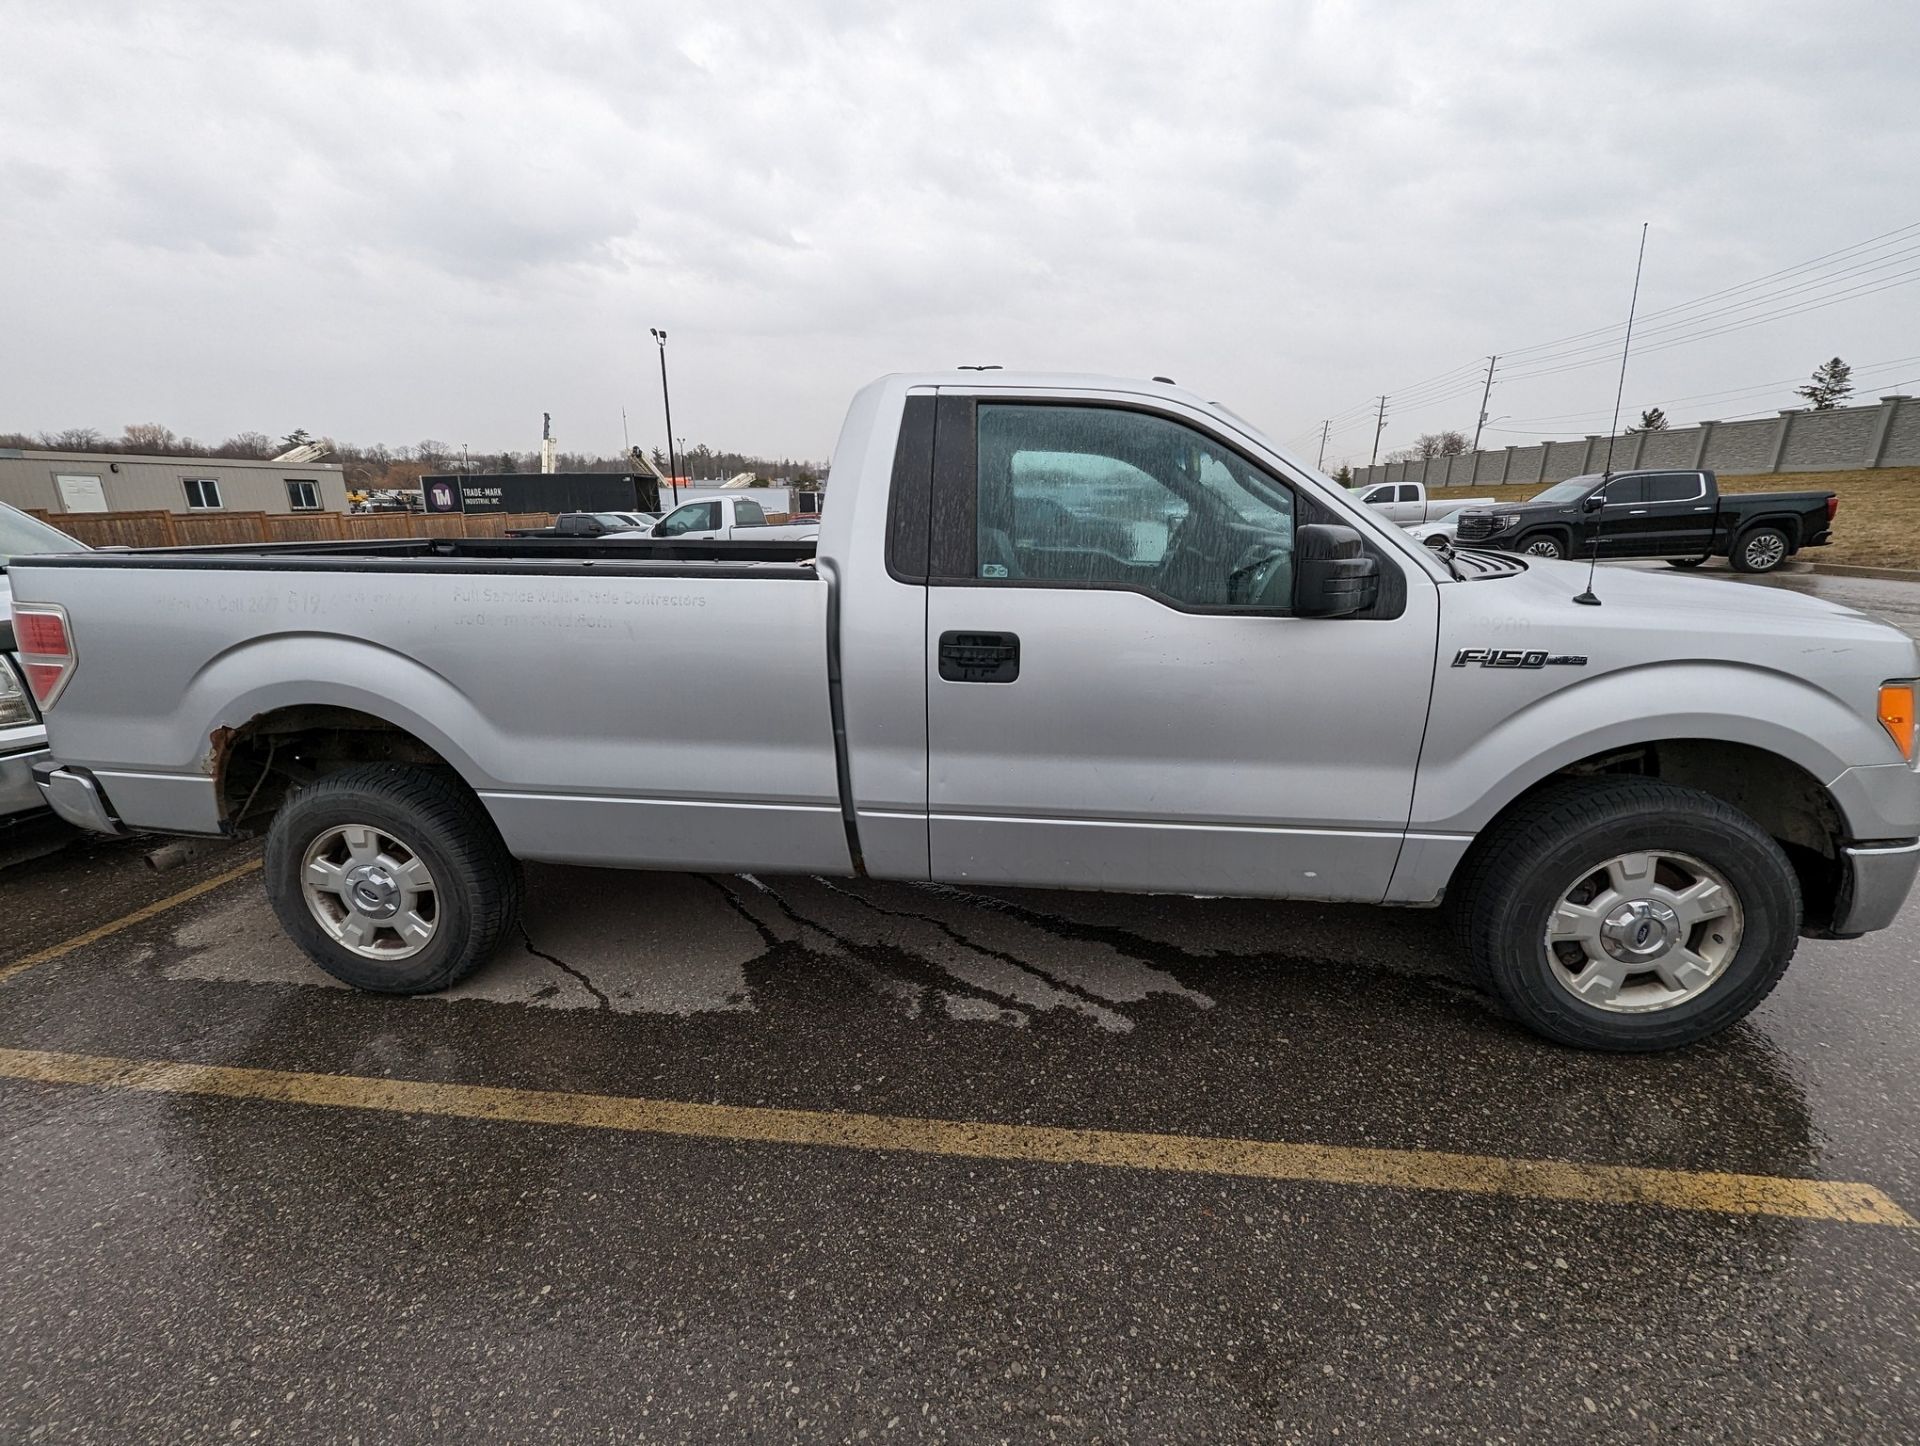 2013 FORD F150 XLT PICKUP TRUCK, VIN# 1FTNF1CFXDKF50570, APPROX. 423,552KMS (NO BLACK TOOL BOXES) - Image 4 of 9